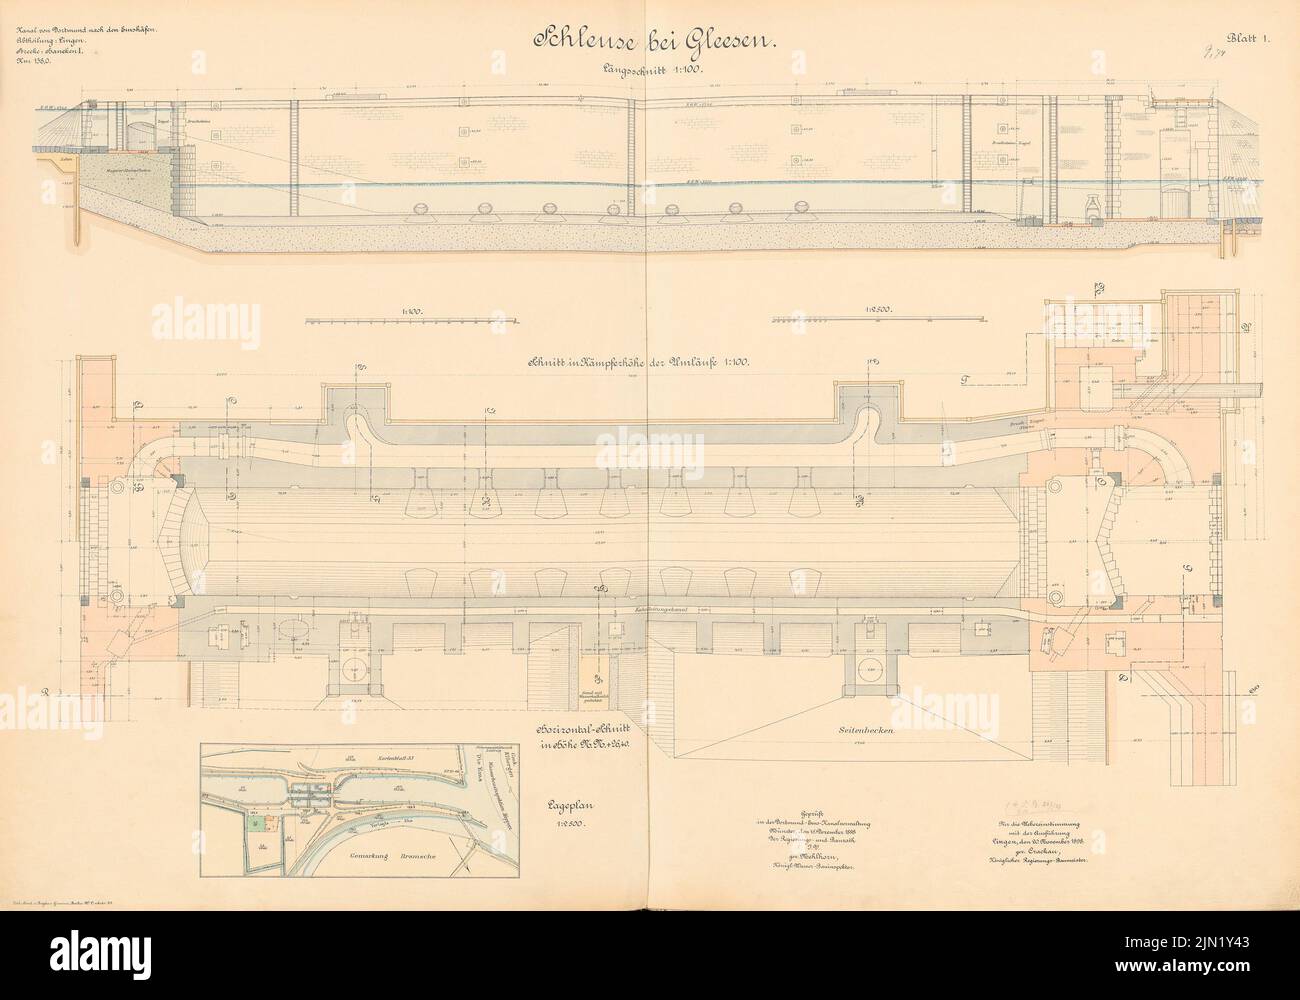 N.N., Dortmund-Ems-Canal. Schleuse, Gleesen: site plan 1: 2500, supervision, cuts 1: 100. Lithograph colored on paper, 68.9 x 98.3 cm (including scan edges) N.N. : Dortmund-Ems-Kanal. Schleuse, Gleesen Stock Photo